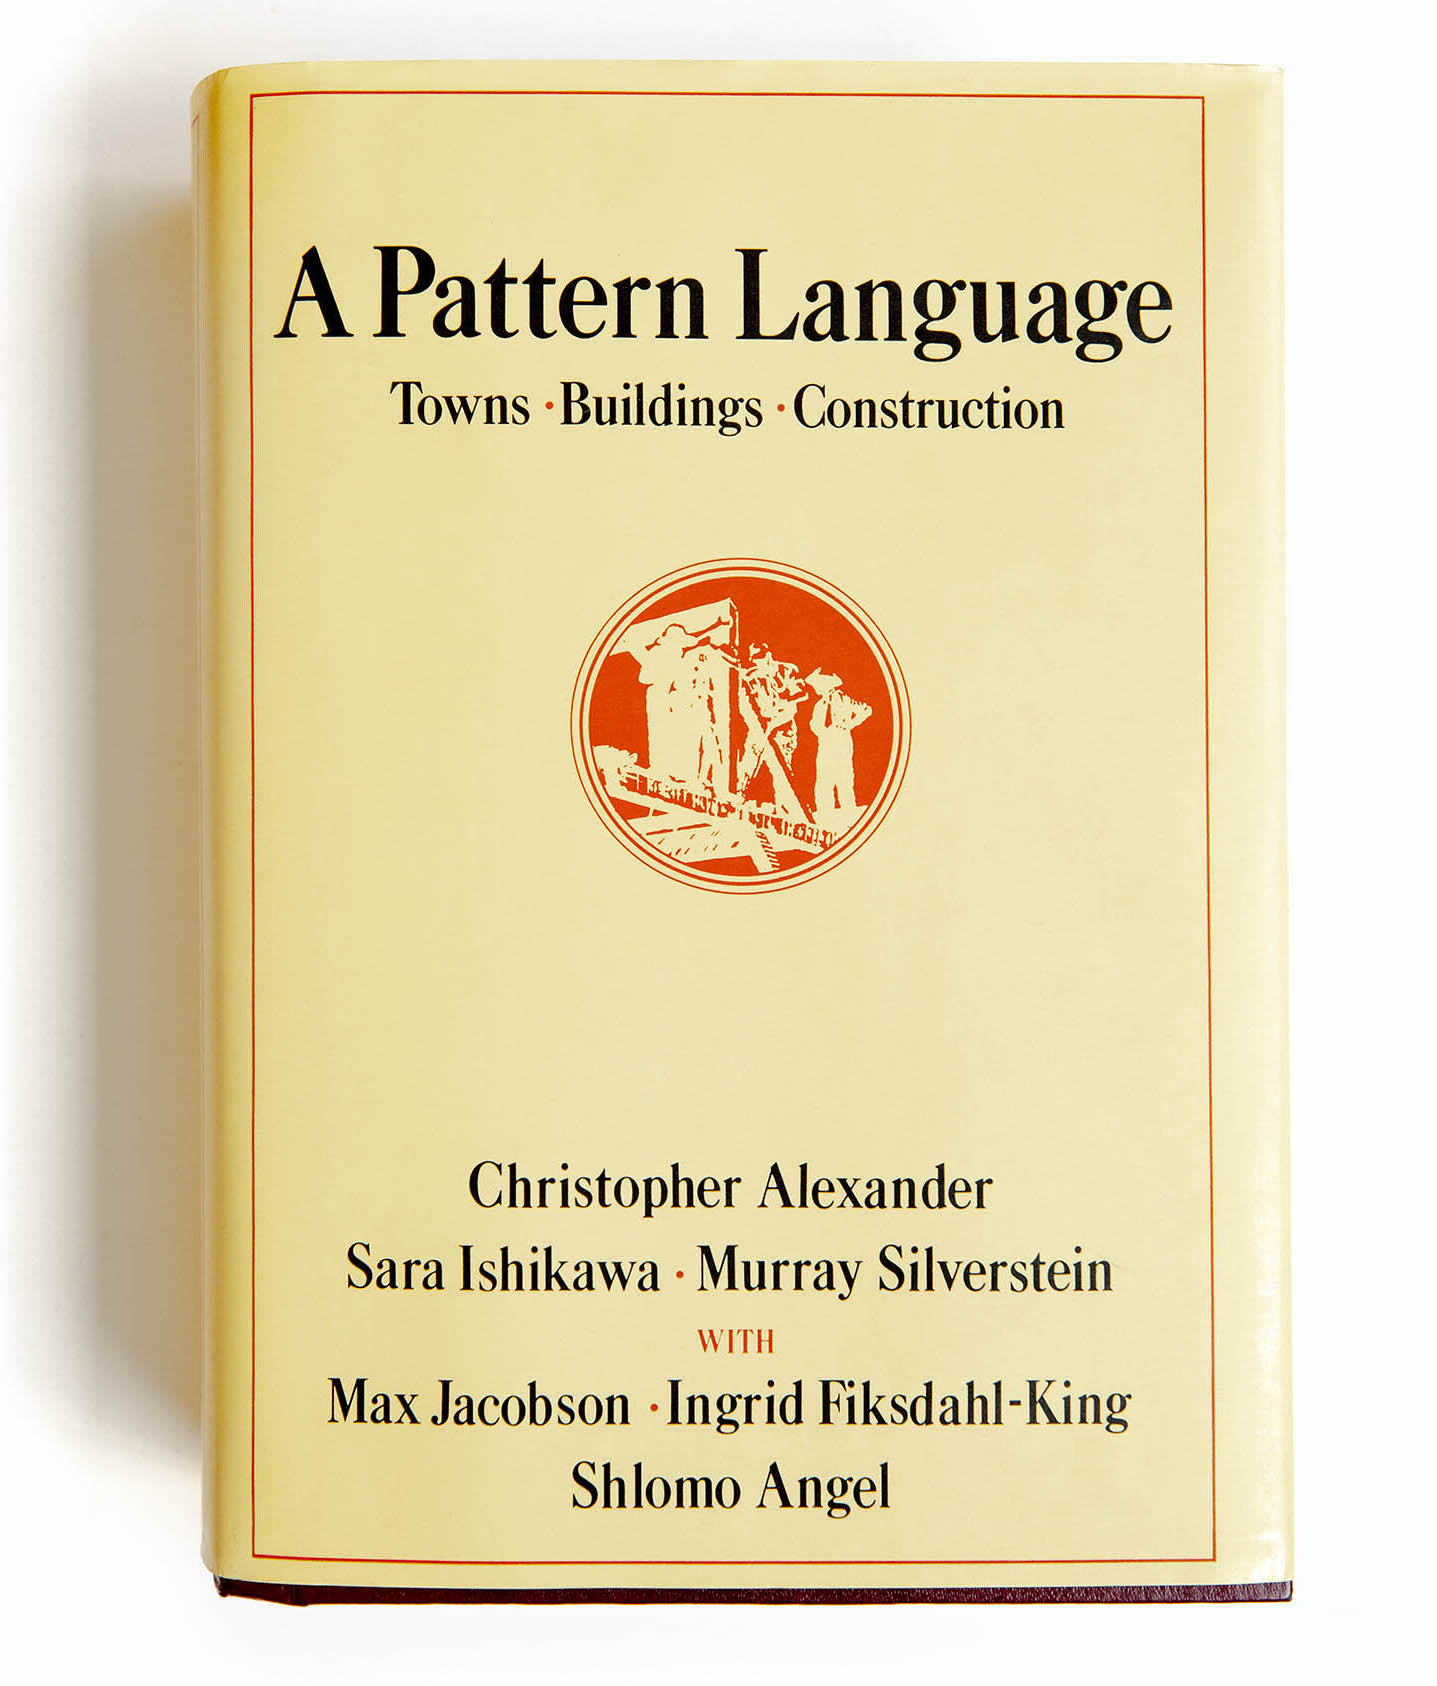 A Pattern Language: A user's guide to the seminal architectural